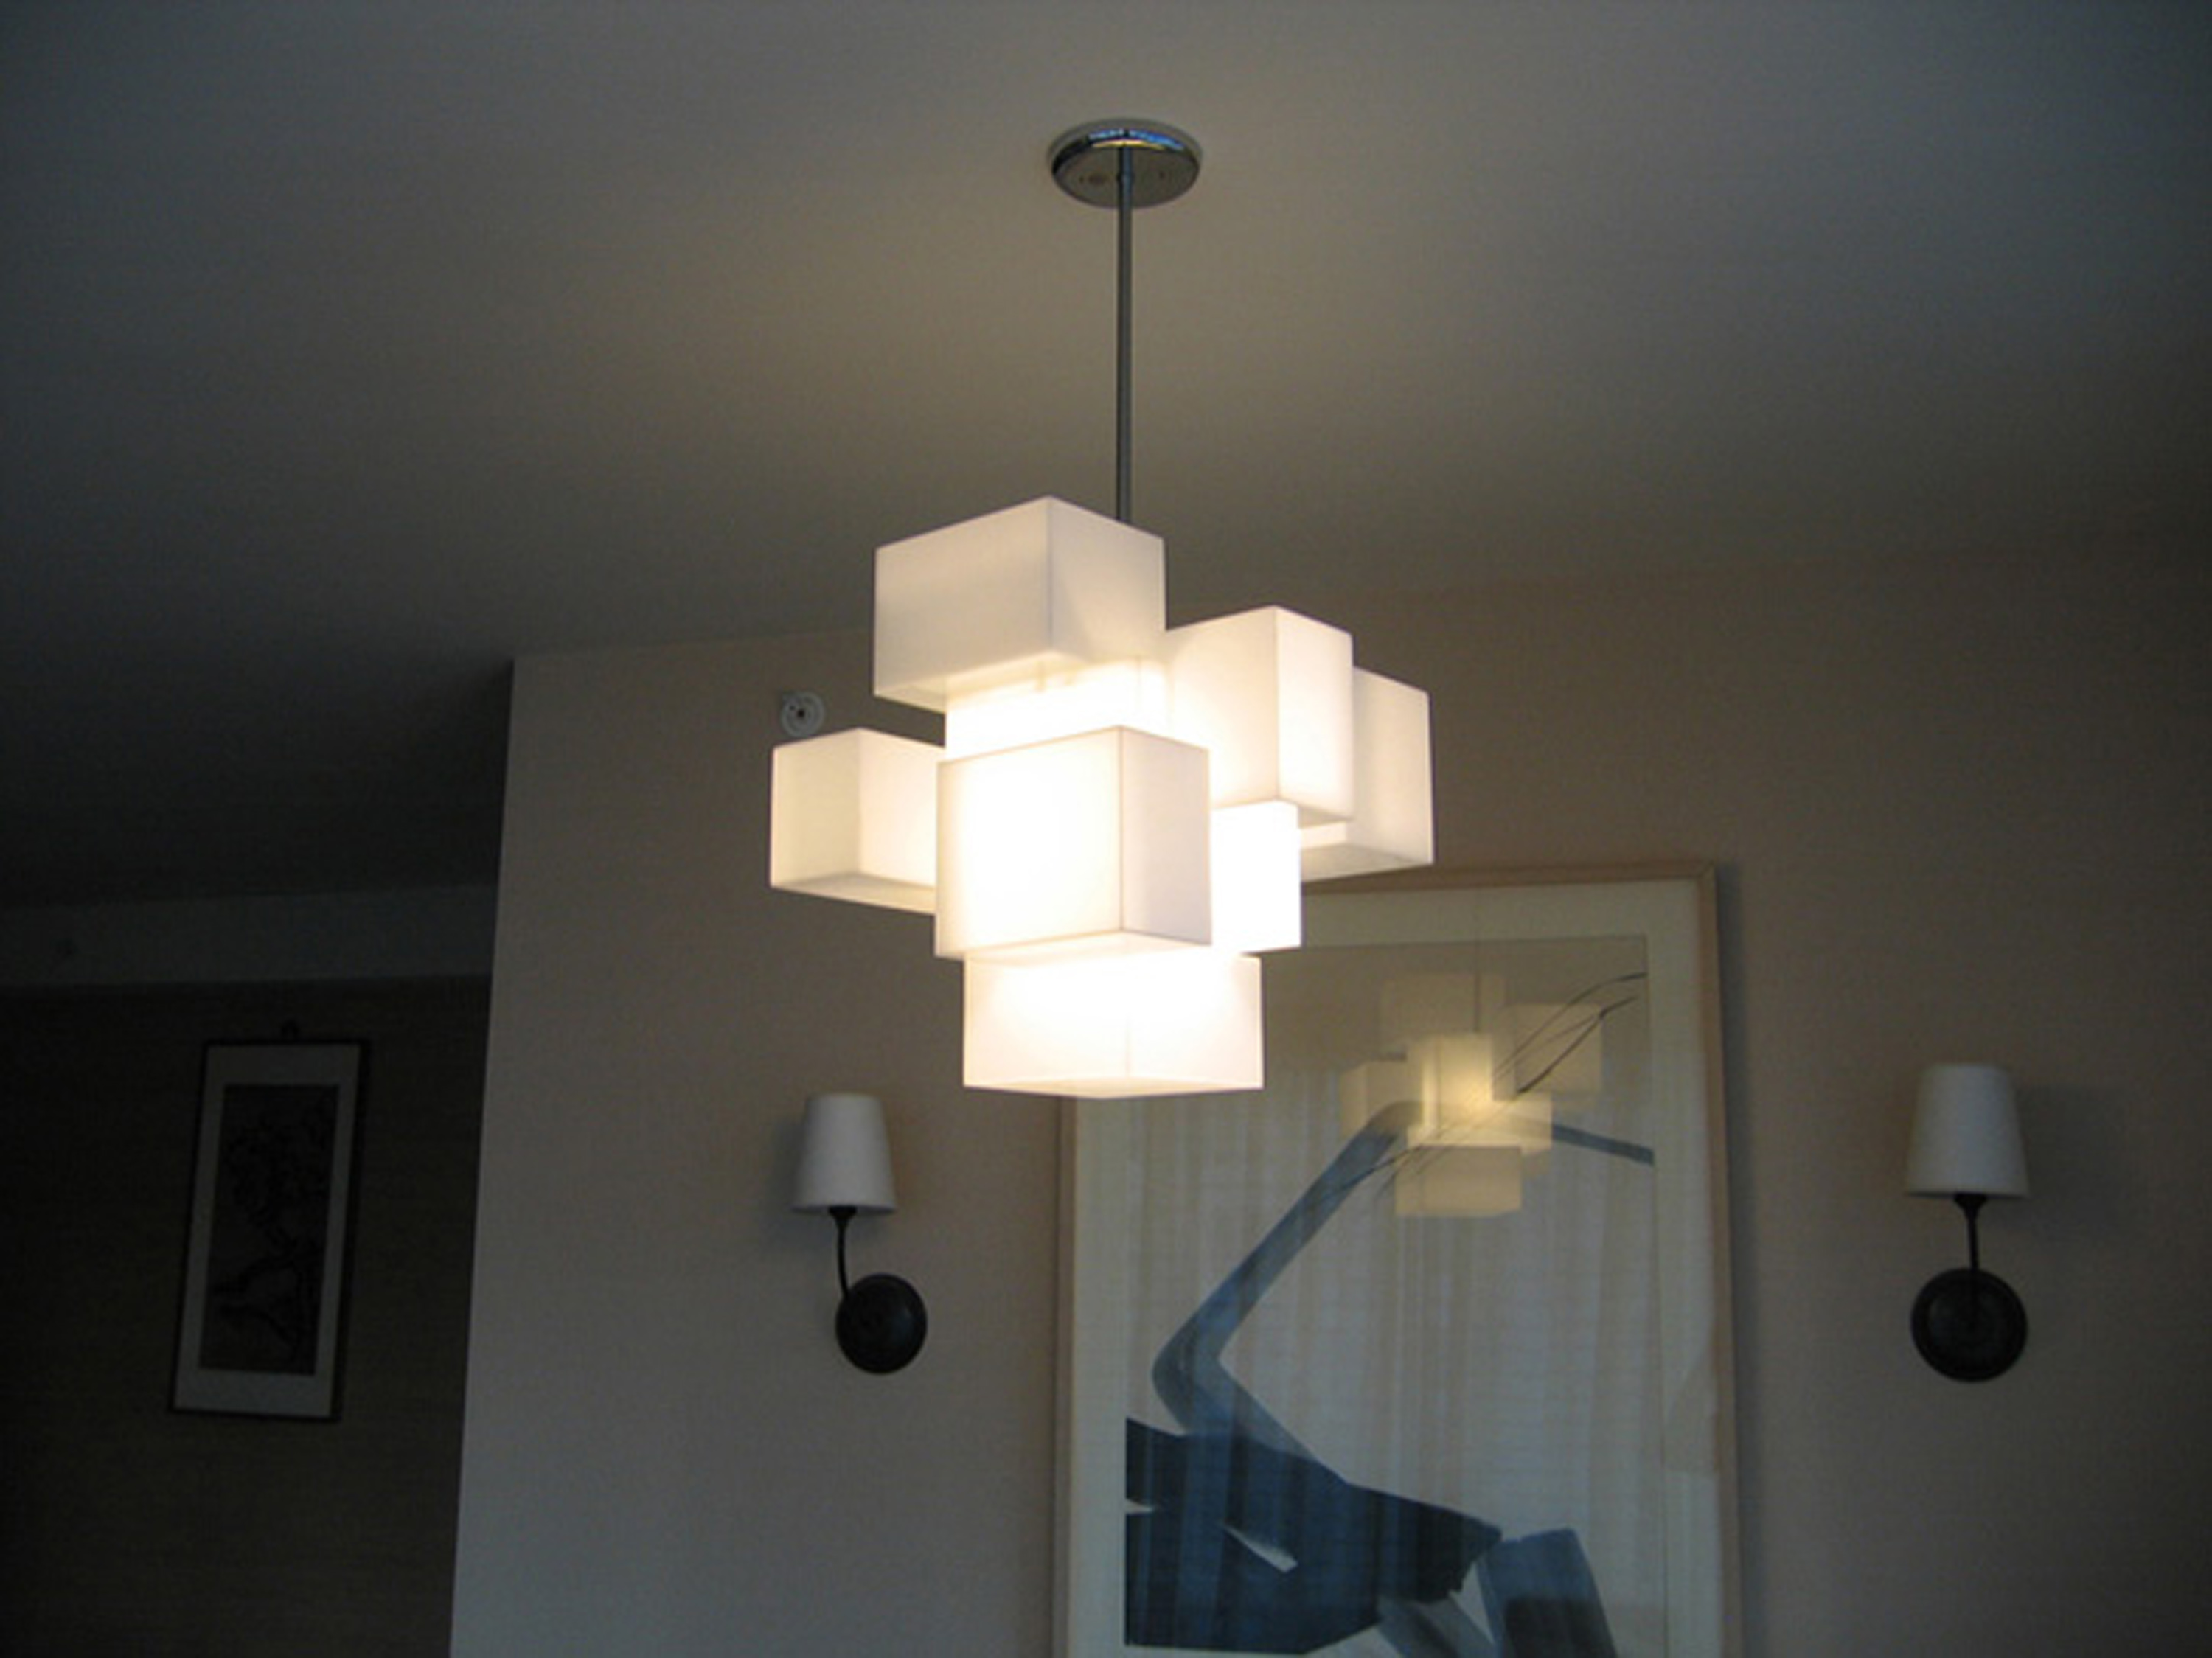 This is a photo of a cloud-like chandelier hanging in a living room, made from acrylic boxes, using an LED bulb